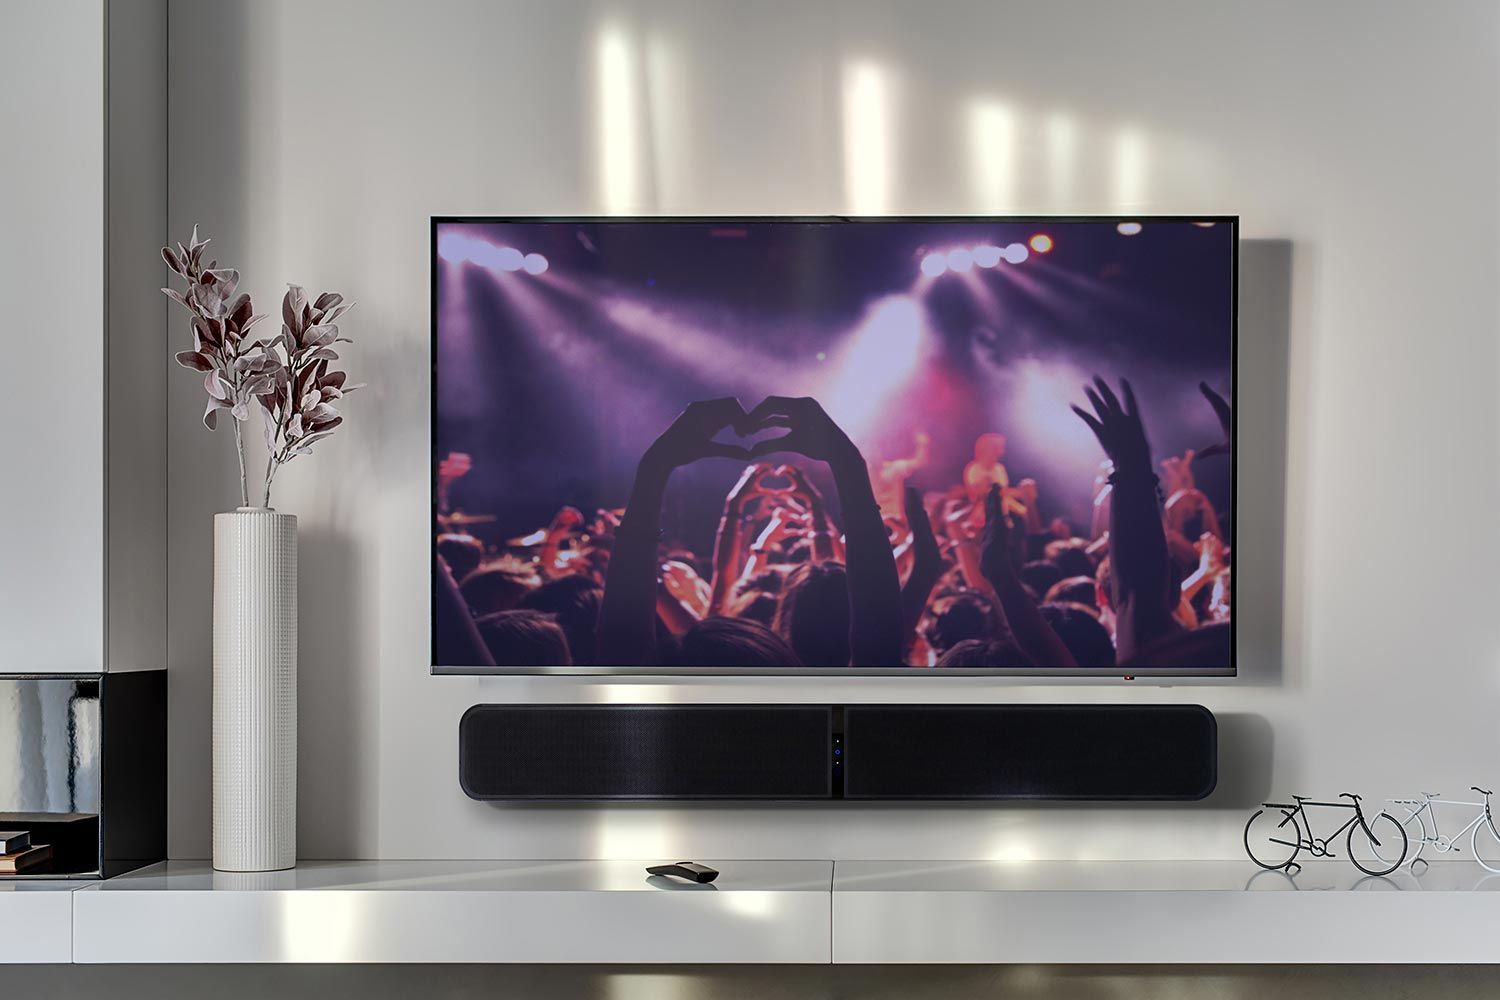 A living room with a mounted TV displaying a concert scene. Below the TV is a Bluesound soundbar, and on a shelf to the left is a tall, white vase with dried leaves. The overall color palette is neutral and contemporary.